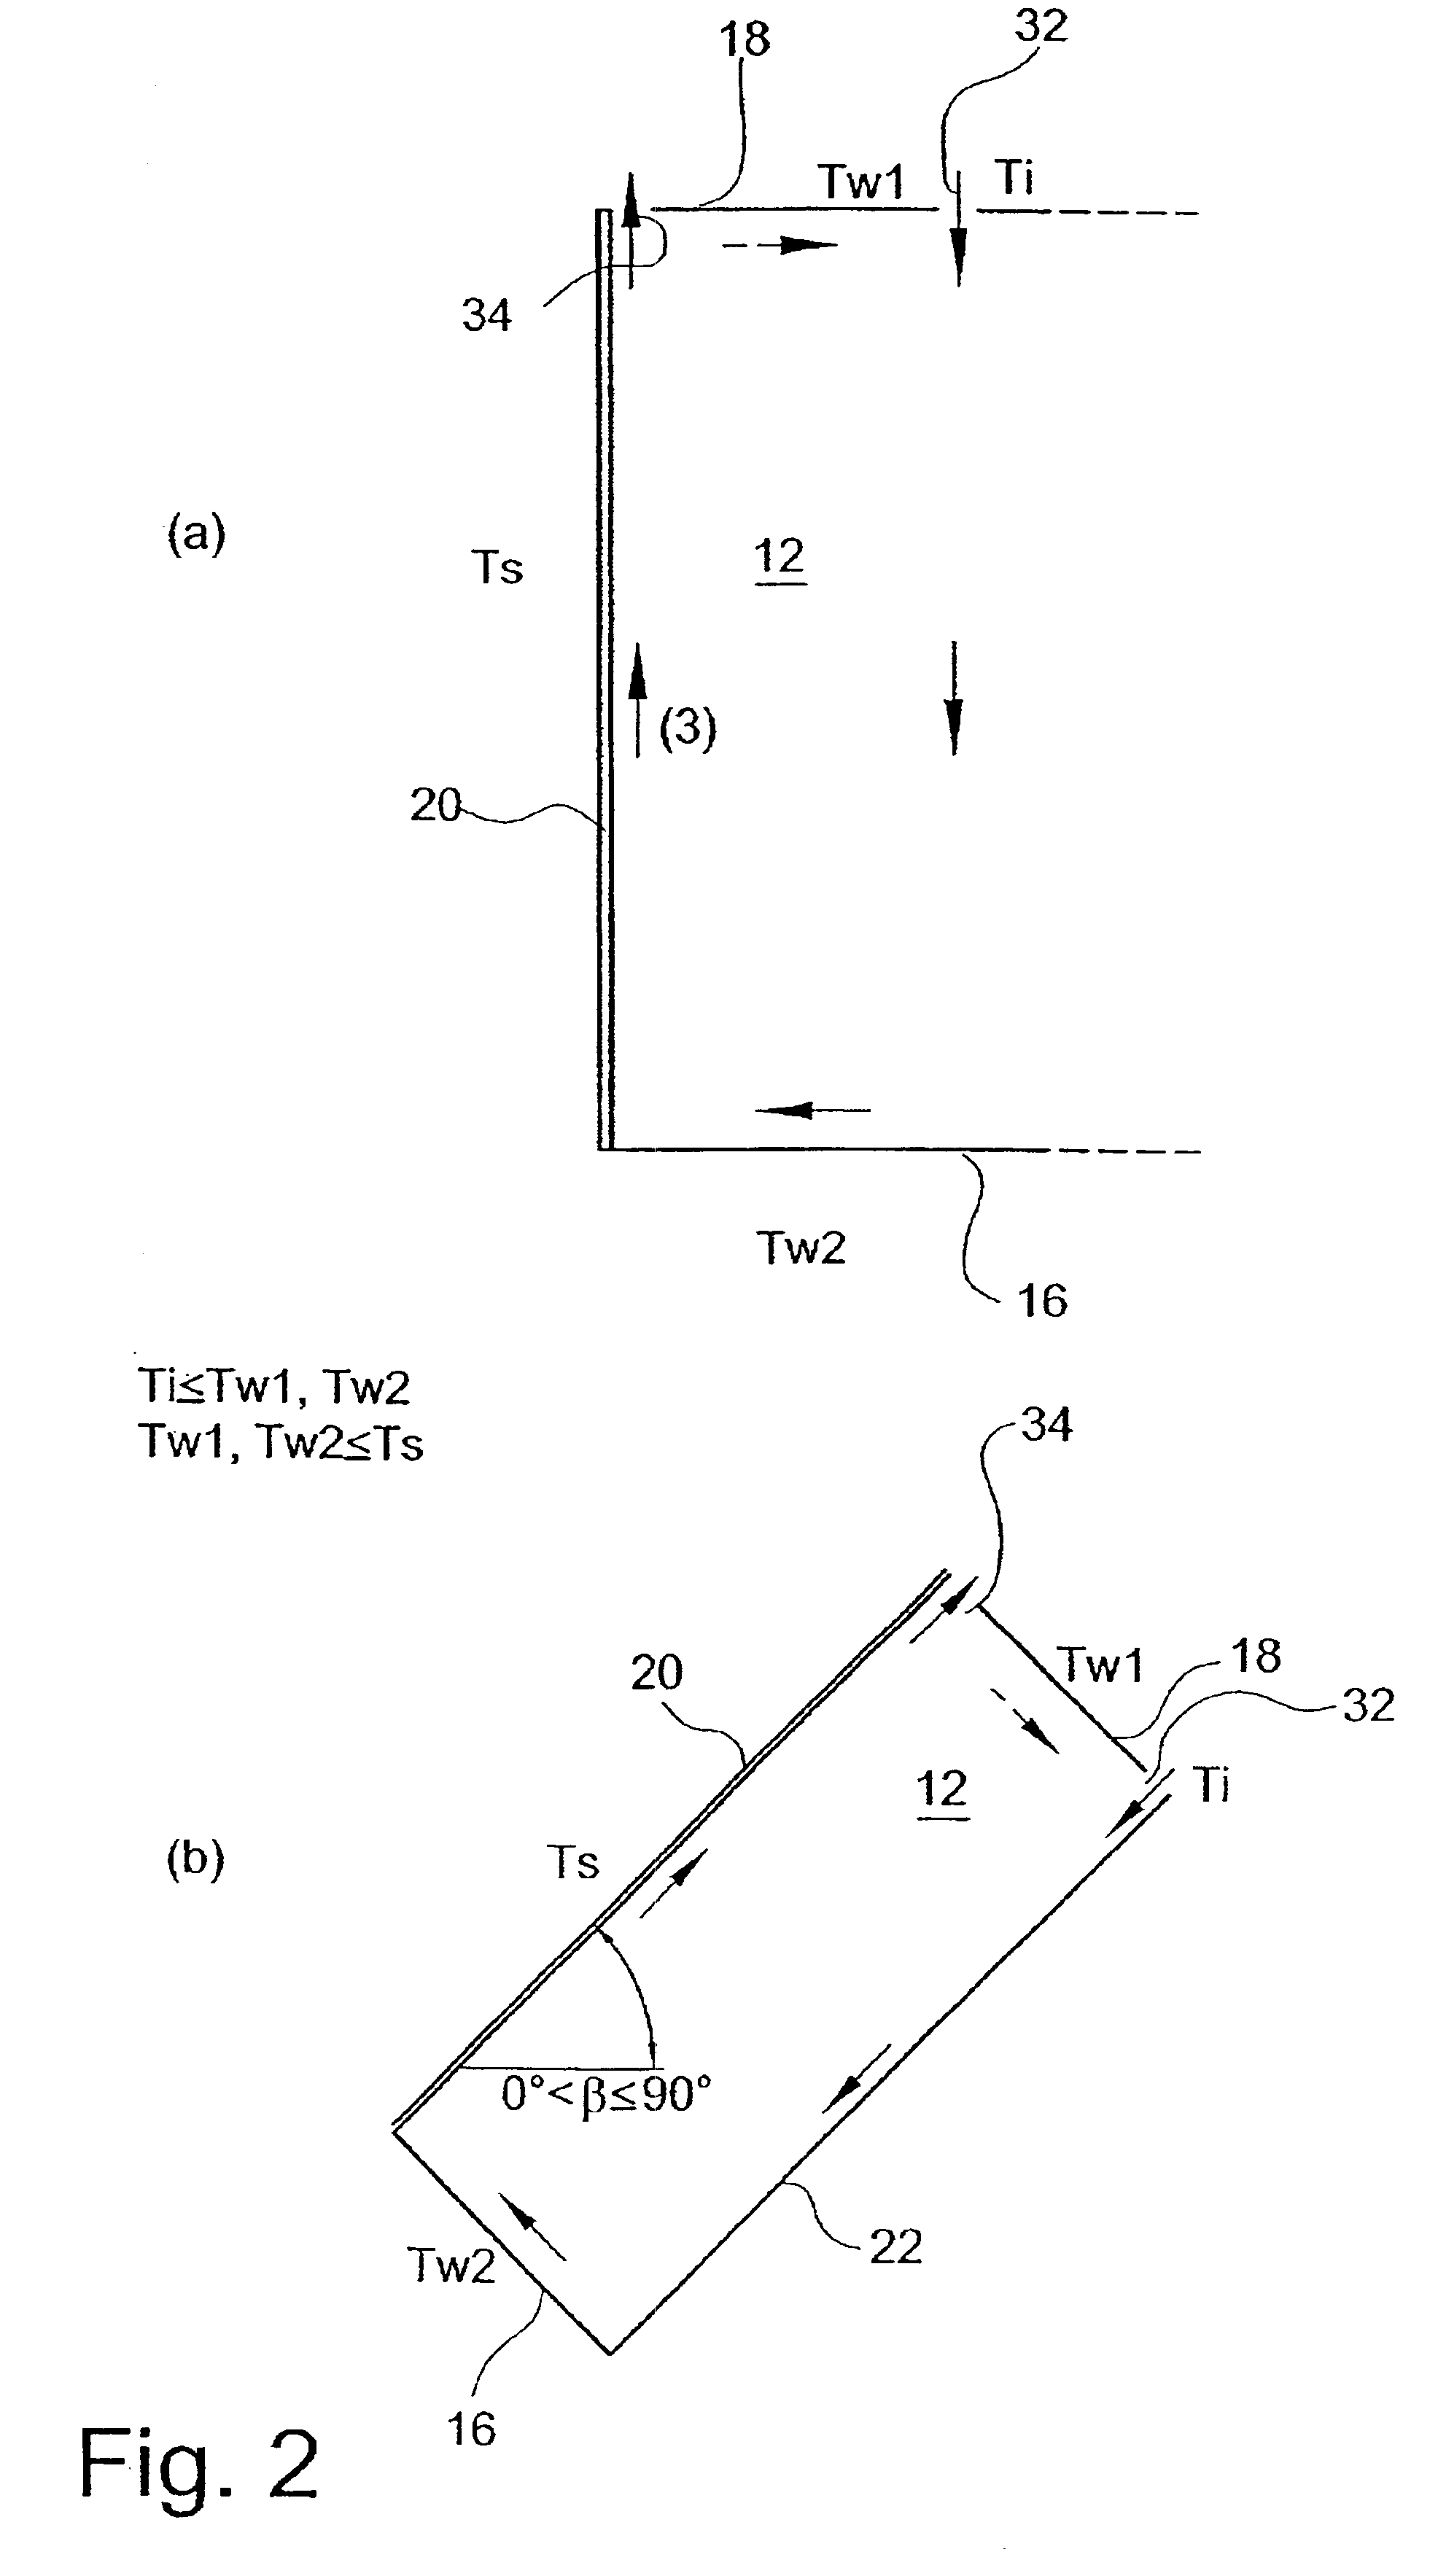 Method and device for treating and/or coating a surface of an object